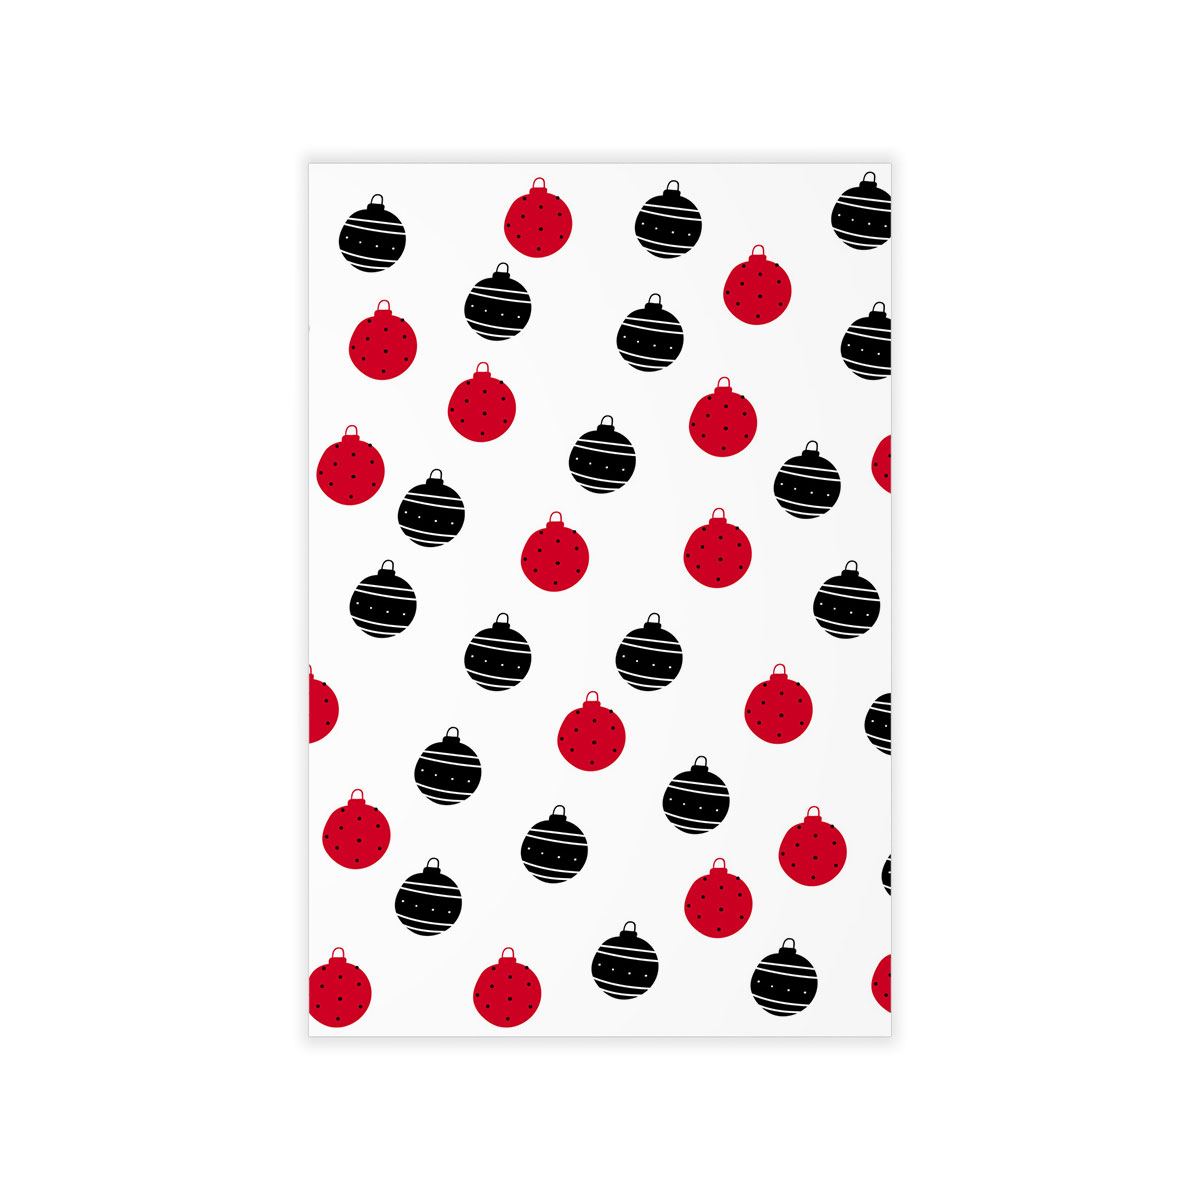 Hand Drawn Black and Red Christmas Balls Seamless Pattern Wall Decals